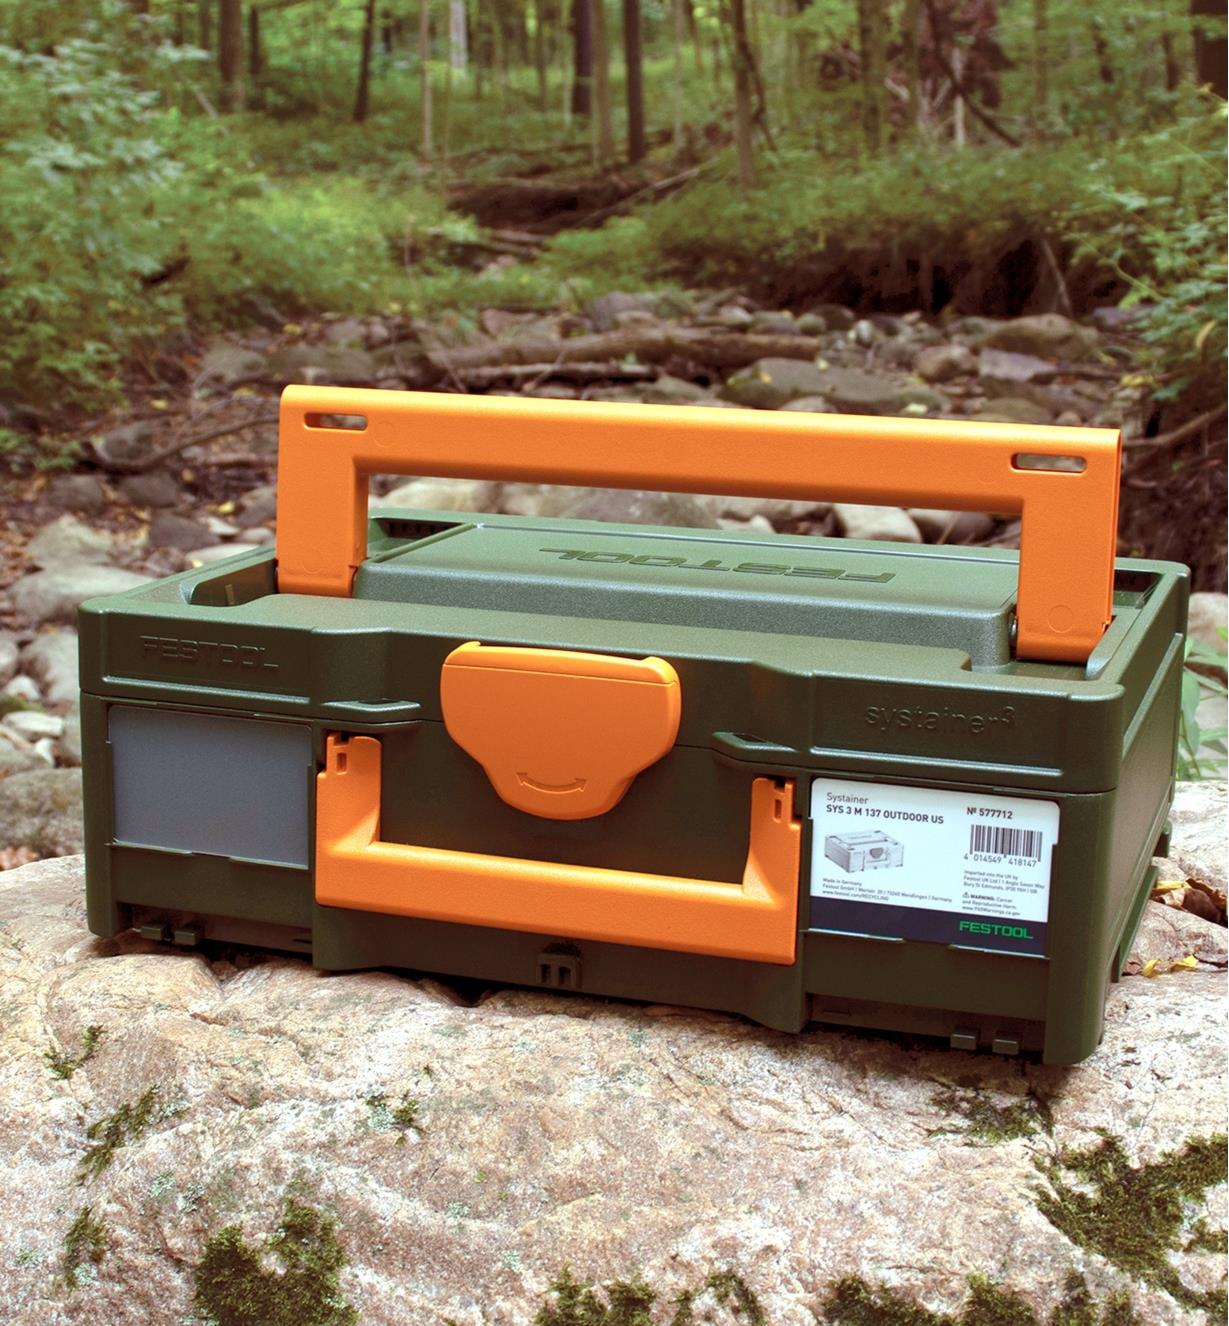 Tanos Classic & T-Loc Systainer Storage Systems - Lee Valley Tools